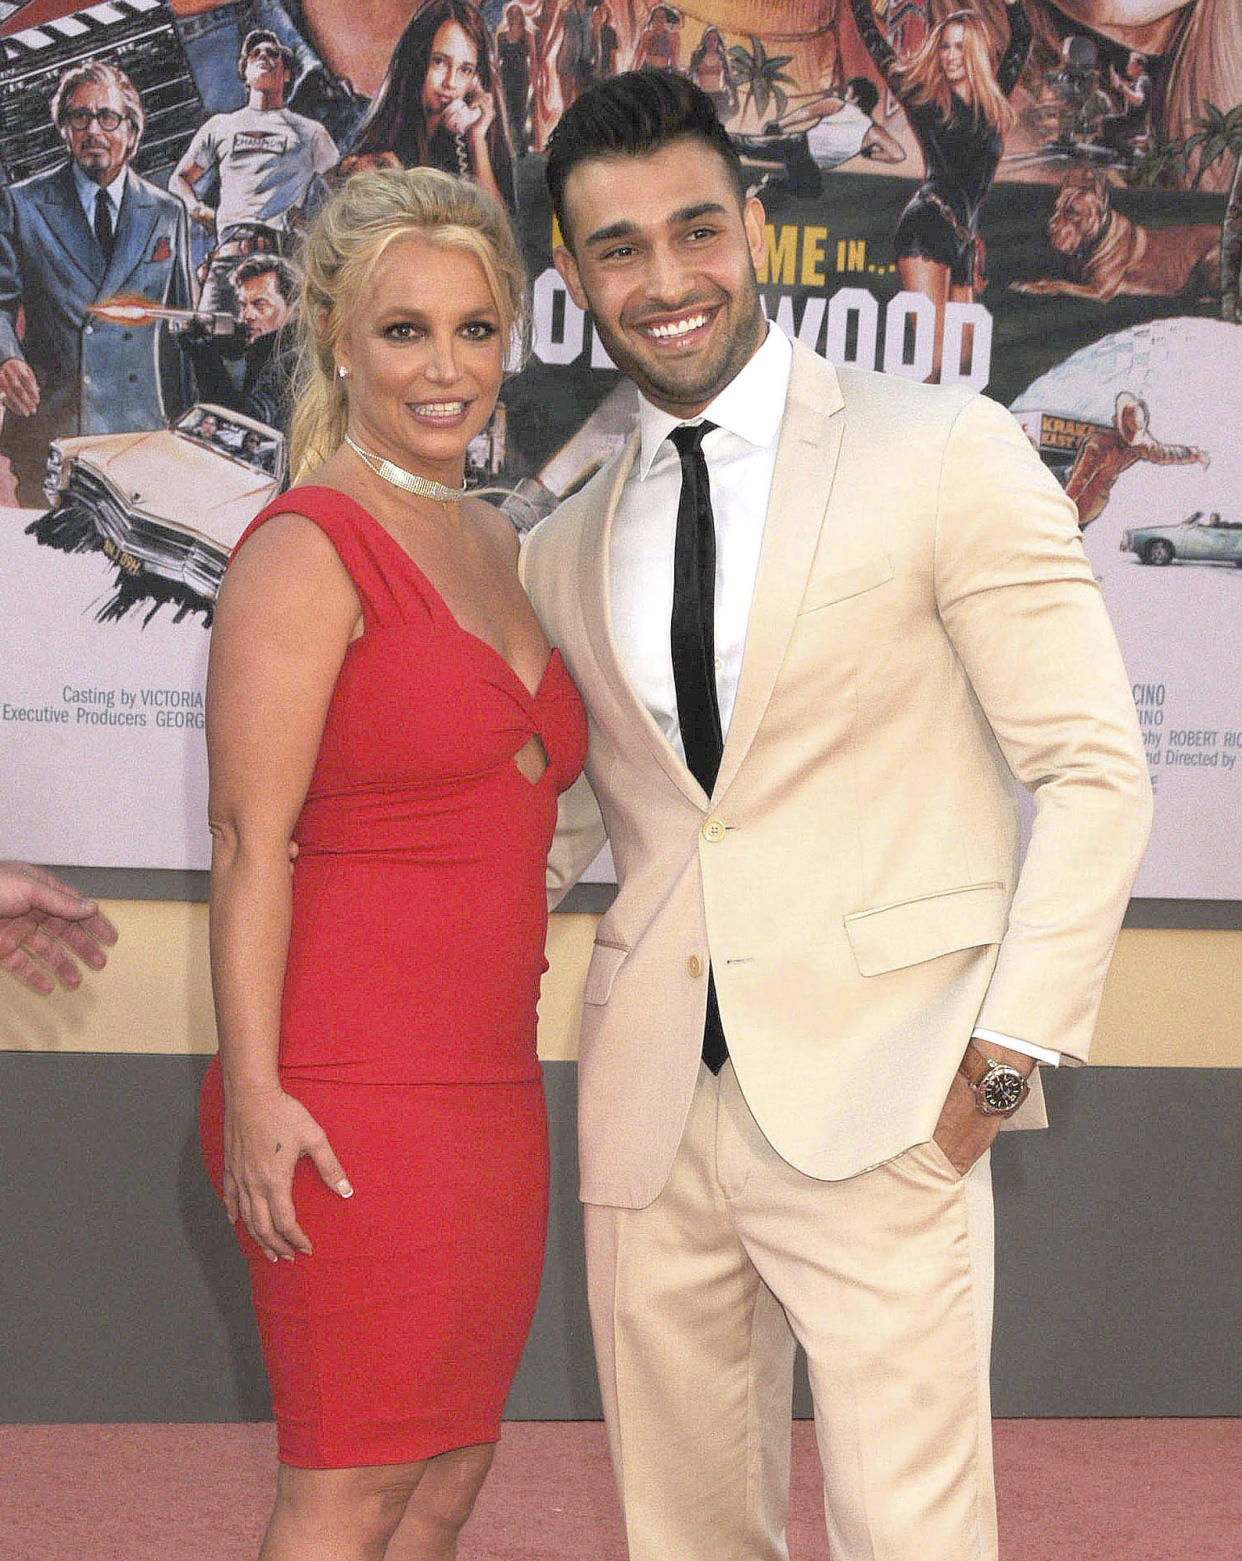 APRIL 11th 2022: Britney Spears announces she is pregnant with her third child - her first with fiance Sam Asghari. - File Photo by: zz/Galaxy/STAR MAX/IPx 2019 7/22/19 Britney Spears and Sam Asghari at the premiere of 